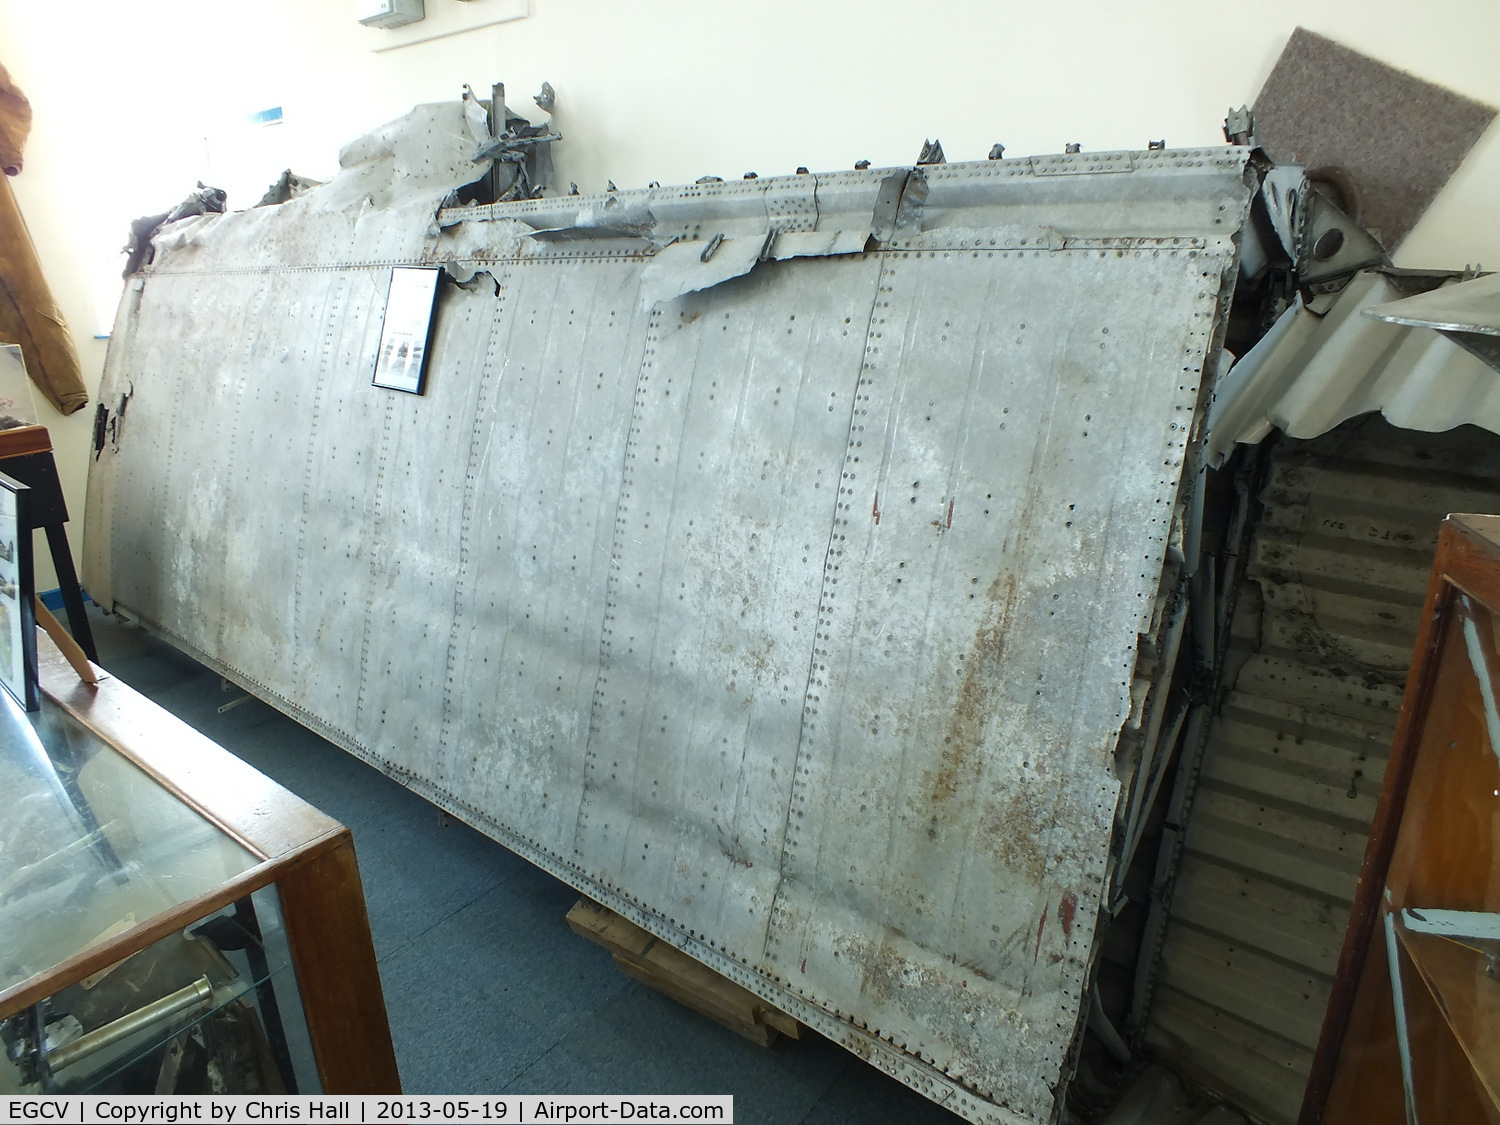 Sleap Airfield Airport, Shrewsbury, England United Kingdom (EGCV) - Outer port wing section from  from Armstrong Whitworth A.W.38 Whitley EB384 which crashed in Scotland with the loss of all six crew members, May 26th 1944